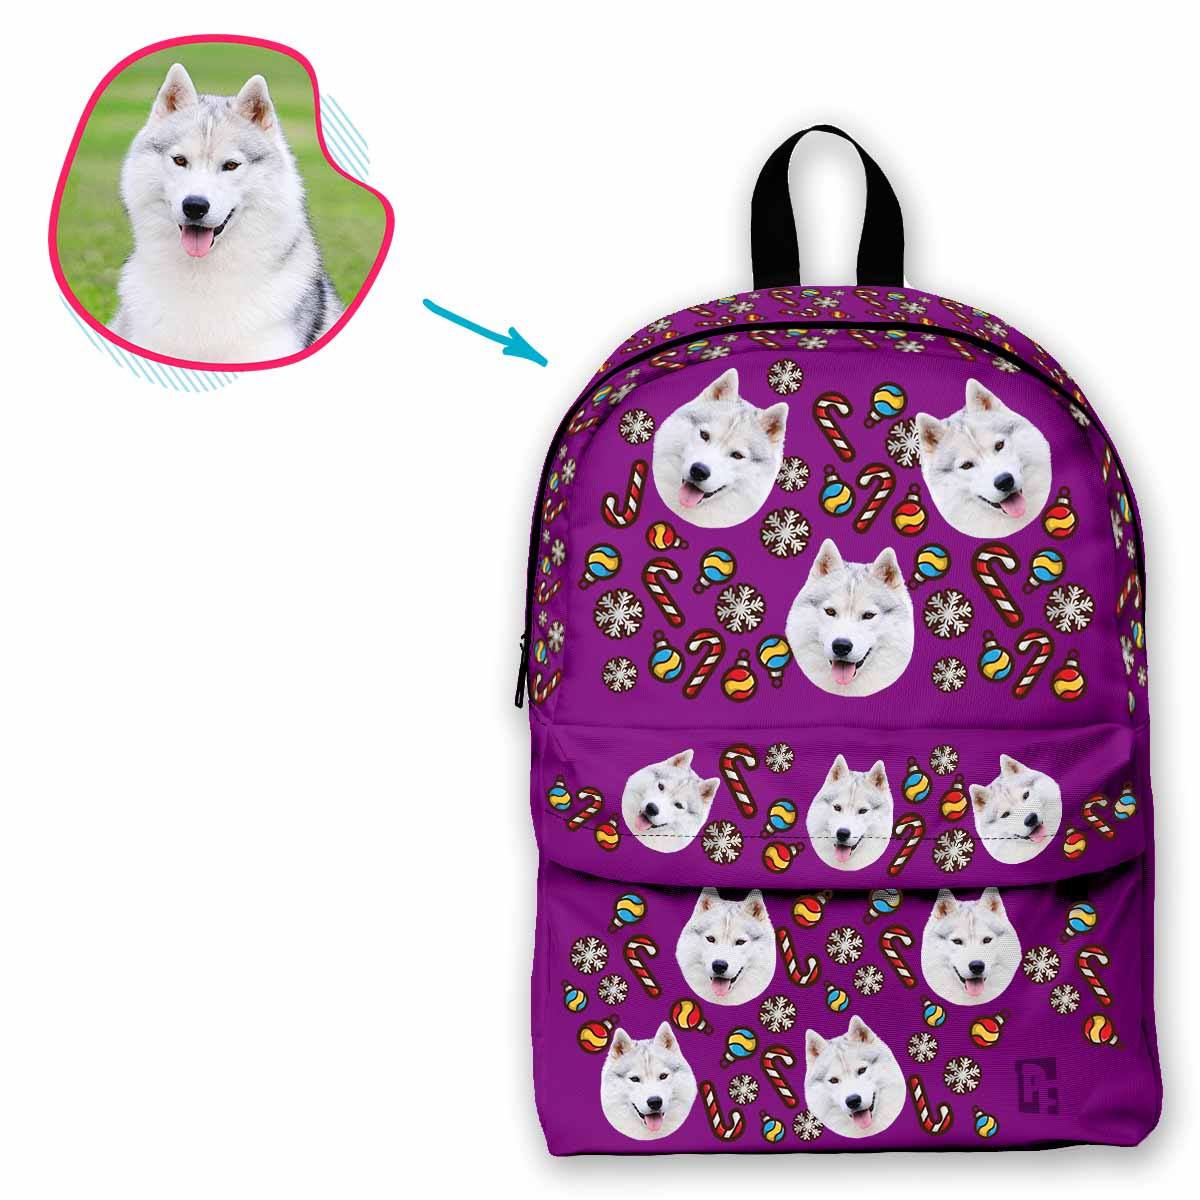 purple Christmas Tree Toy classic backpack personalized with photo of face printed on it